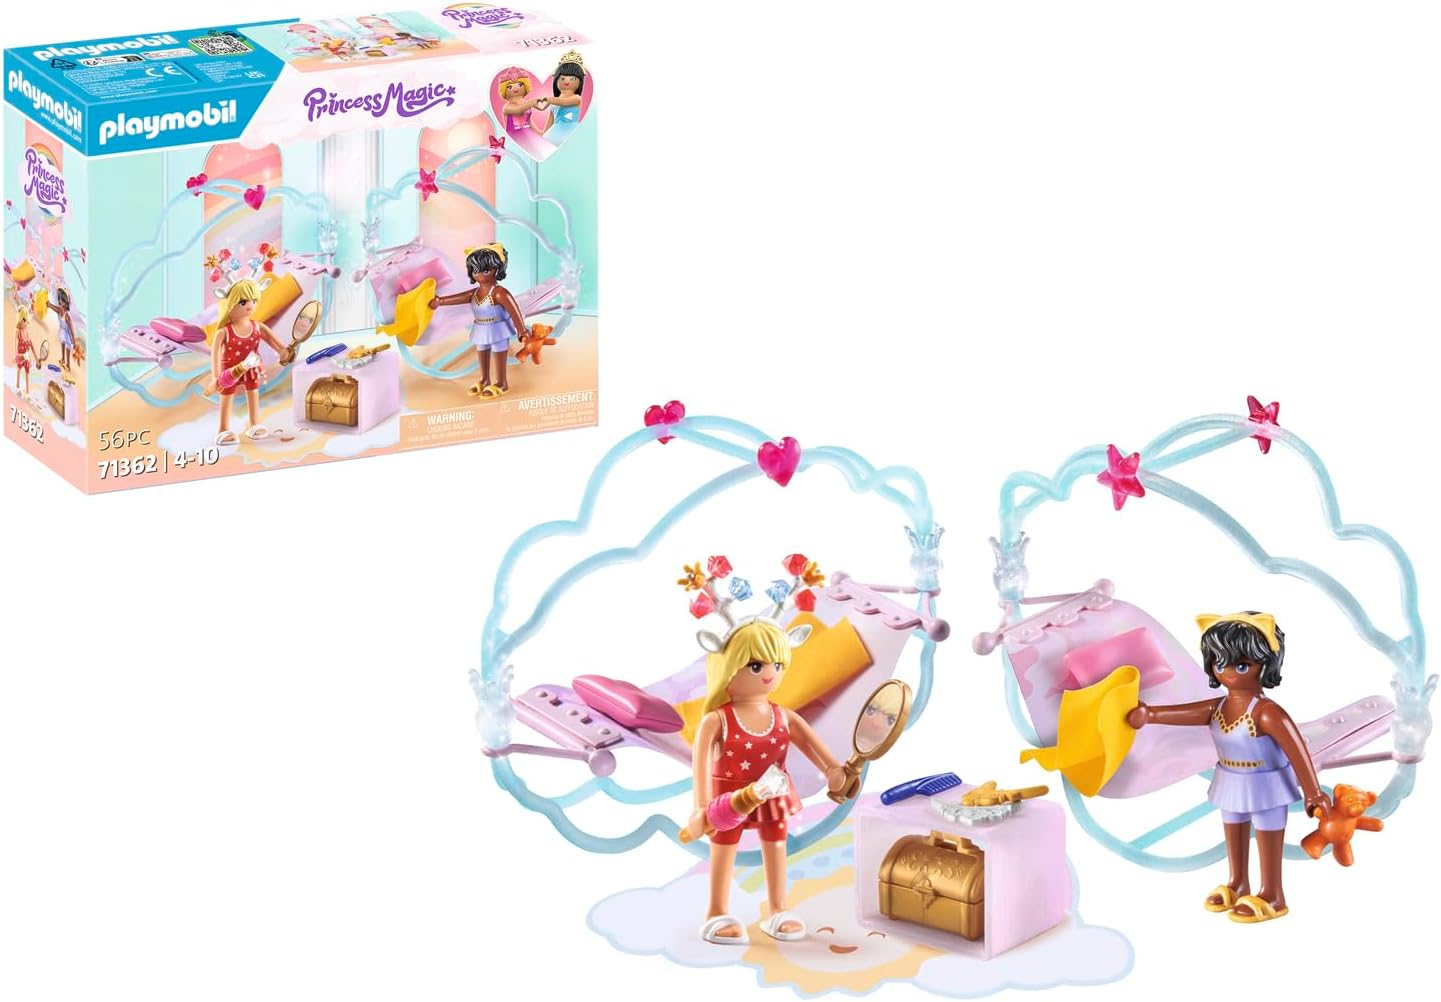 PLAYMOBIL Princess Magic 71362 Heavenly Pyjama Party, Dreamlike Overnight in a Cloud Bed, with Hammocks and Fantastic Accessories, Toy for Children from 4 Years